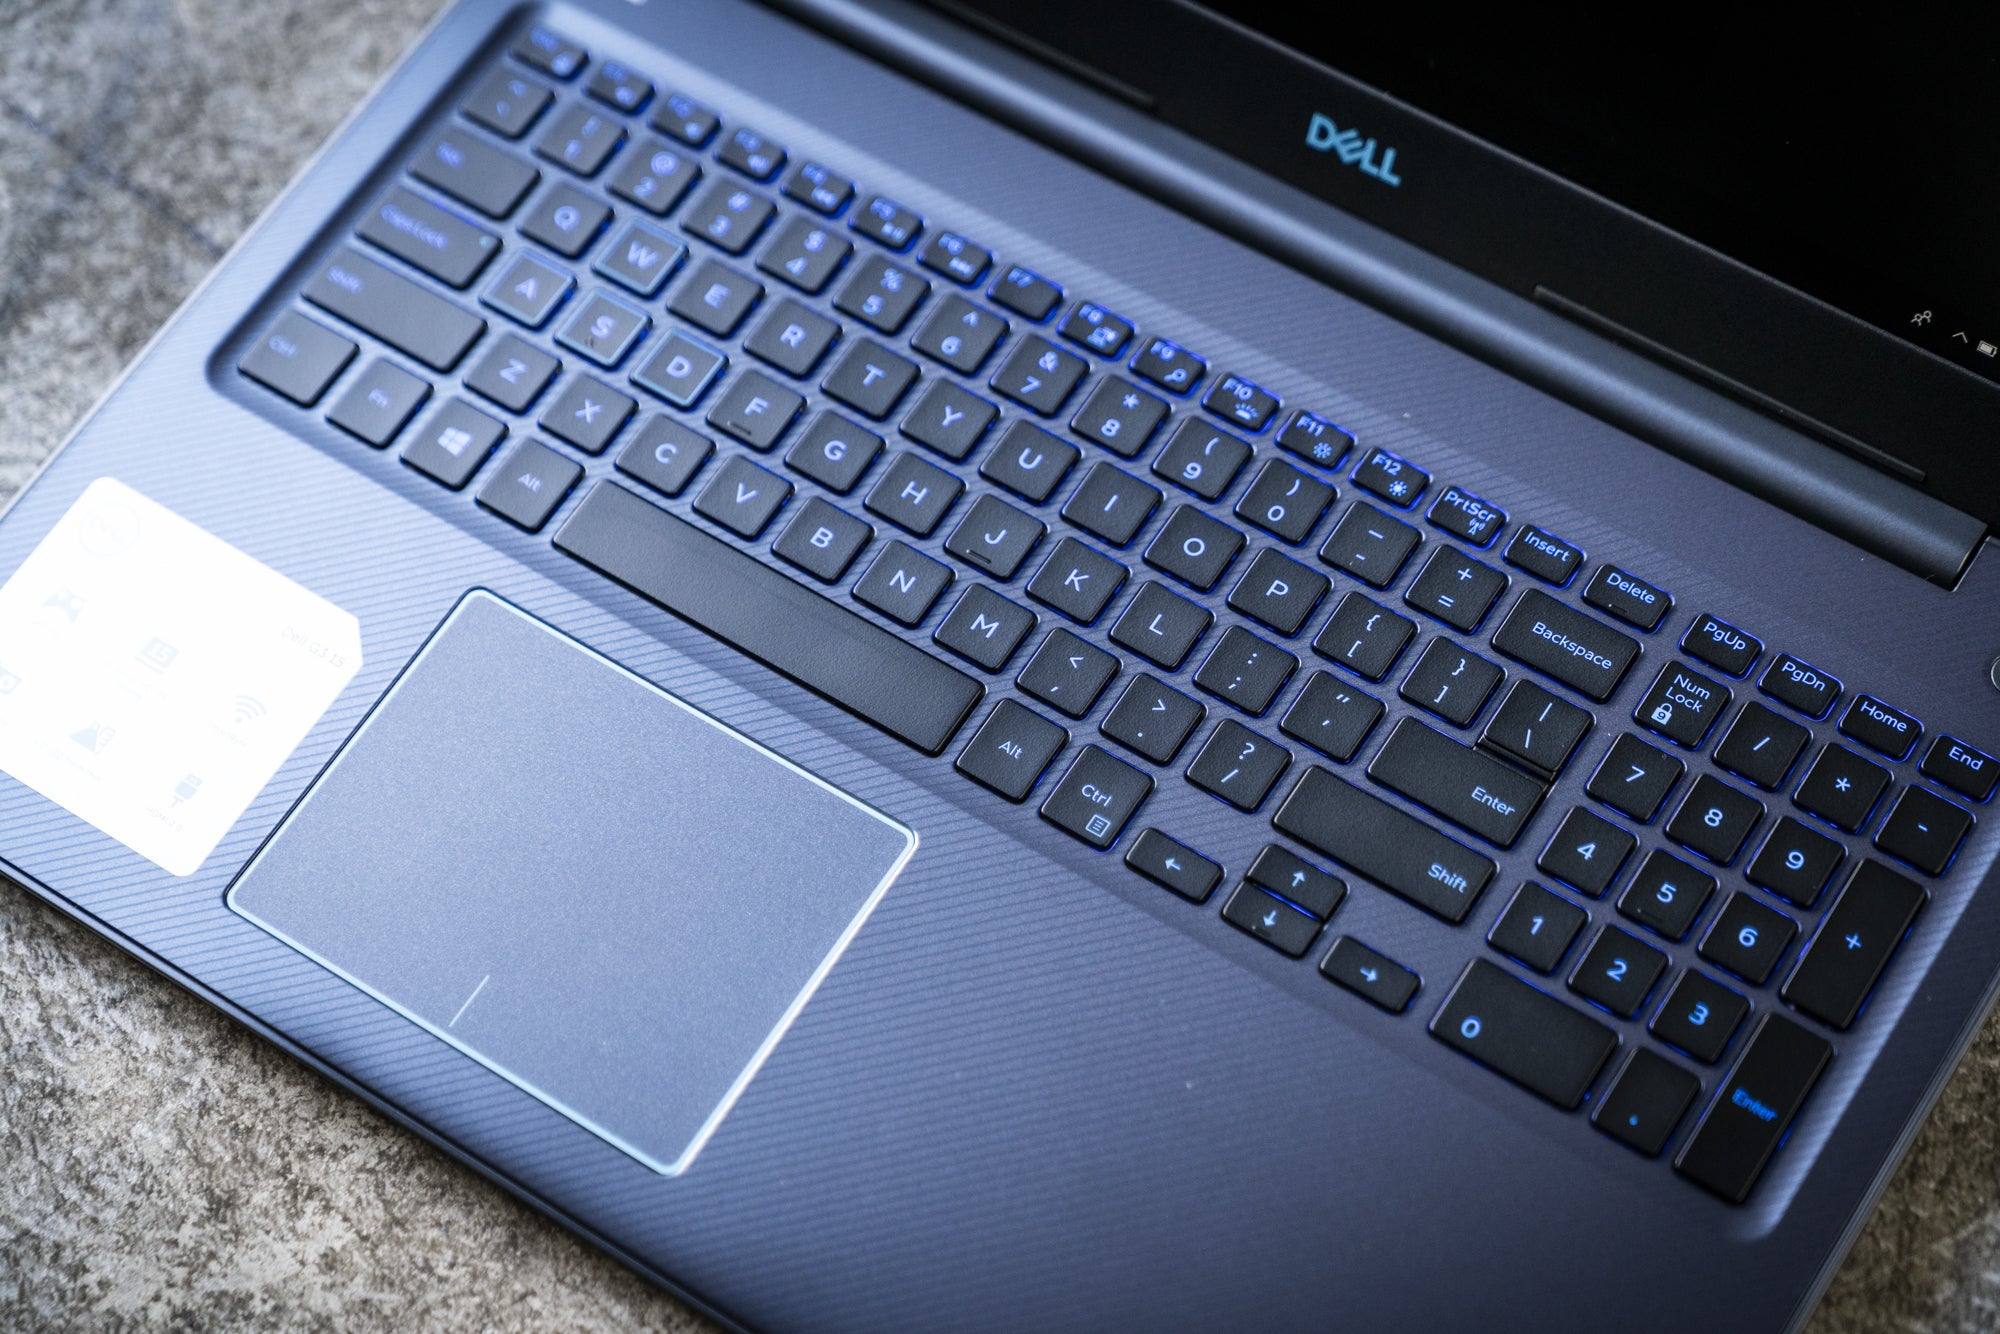 Dell G3 15 (3579) review: This budget gaming laptop makes the most of